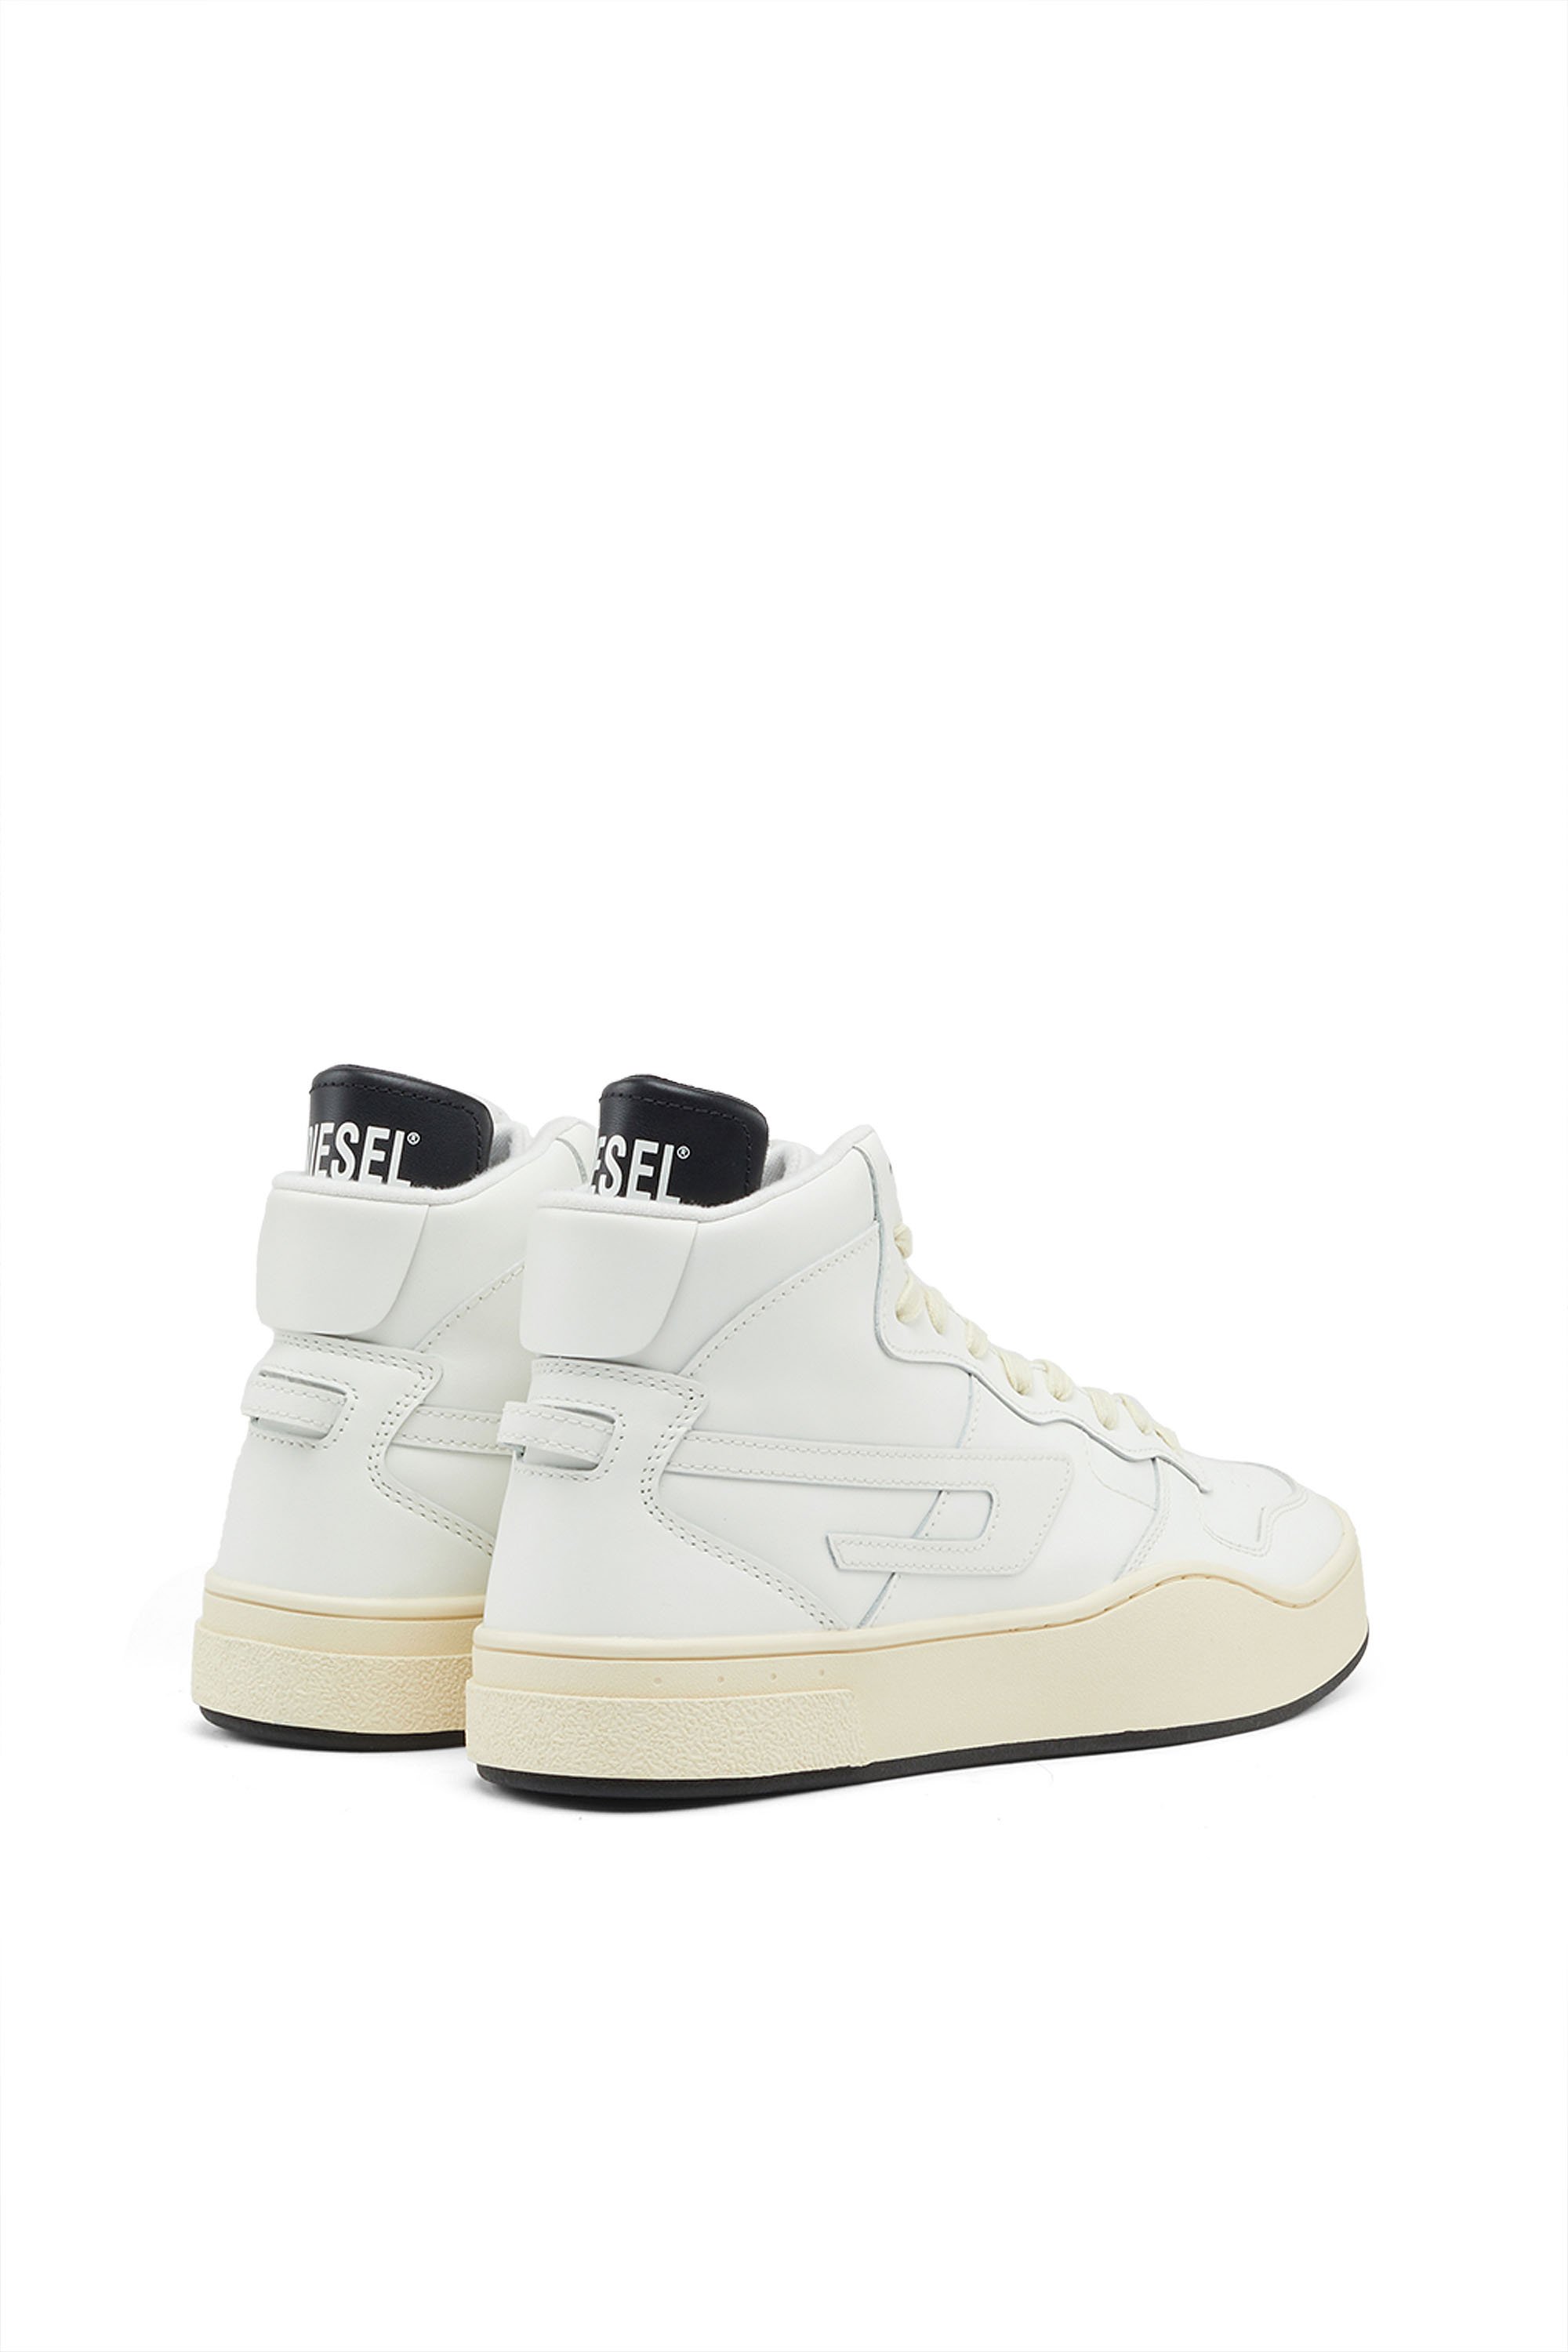 S-UKIYO MID Man: Leather high-top sneakers with D logo | Diesel